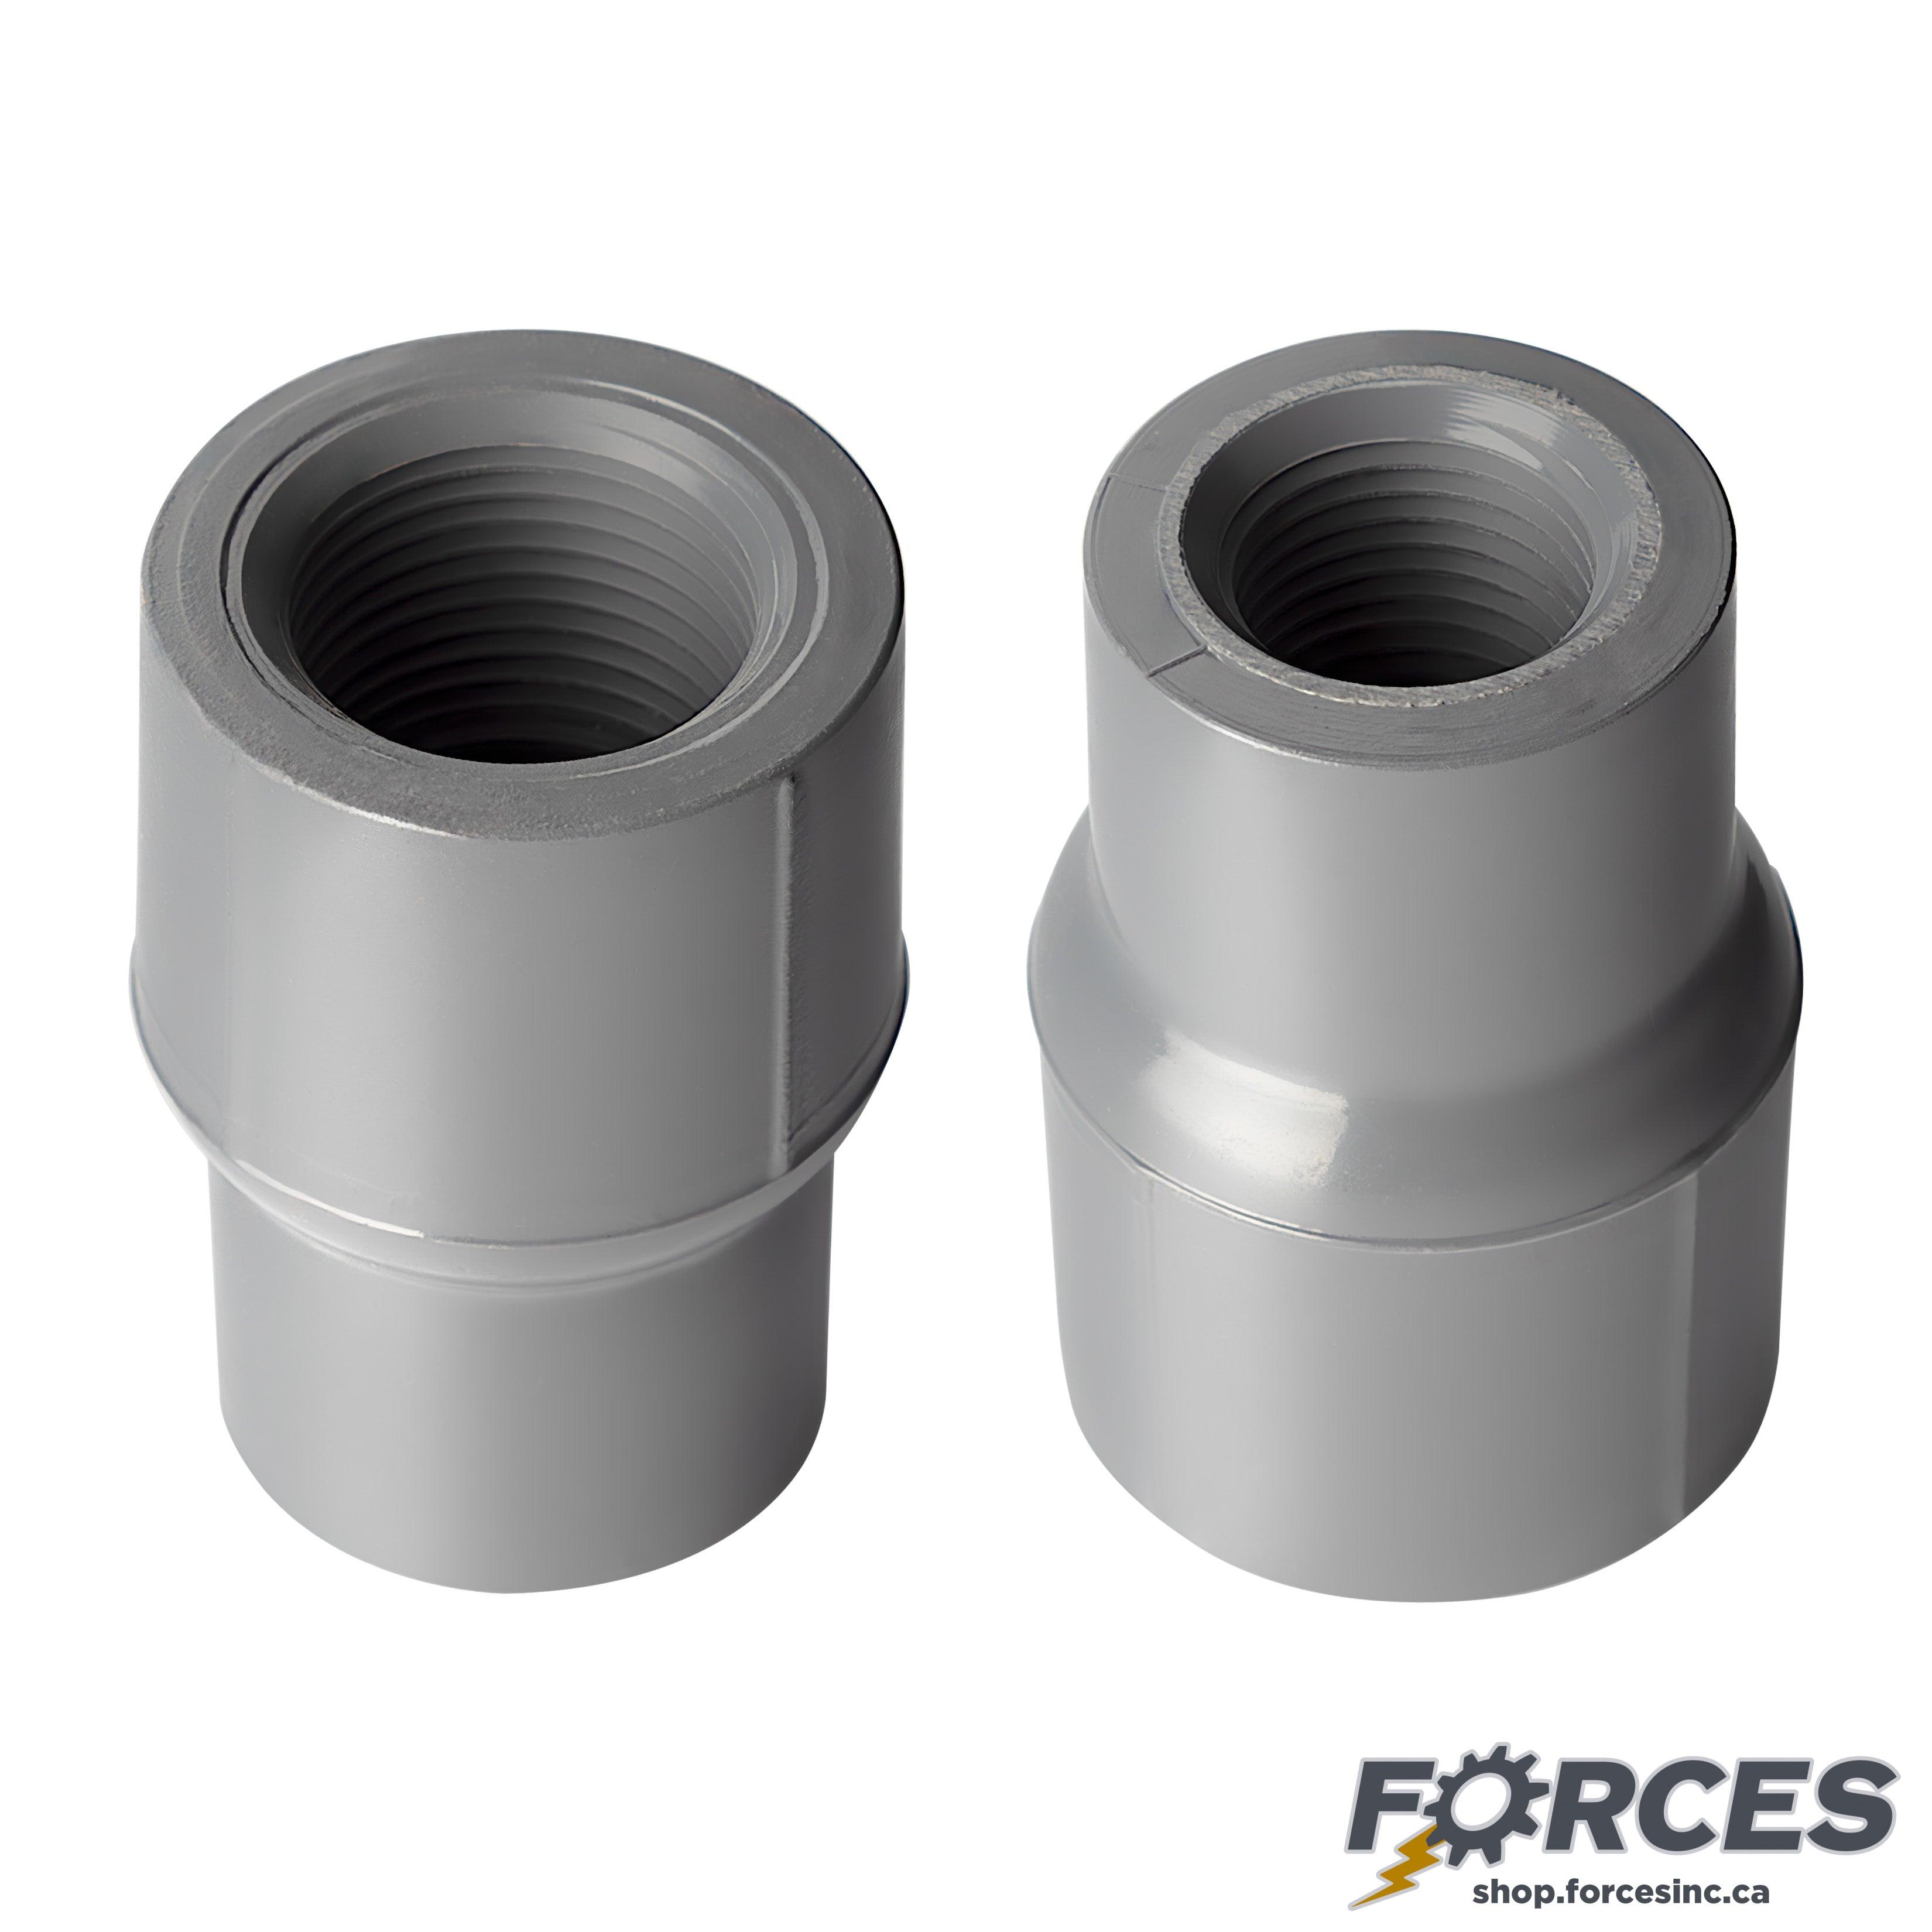 1-1/2" x 1-1/4" Reducing Coupling (Threaded) Sch 80 - PVC Grey | 830212 - Forces Inc